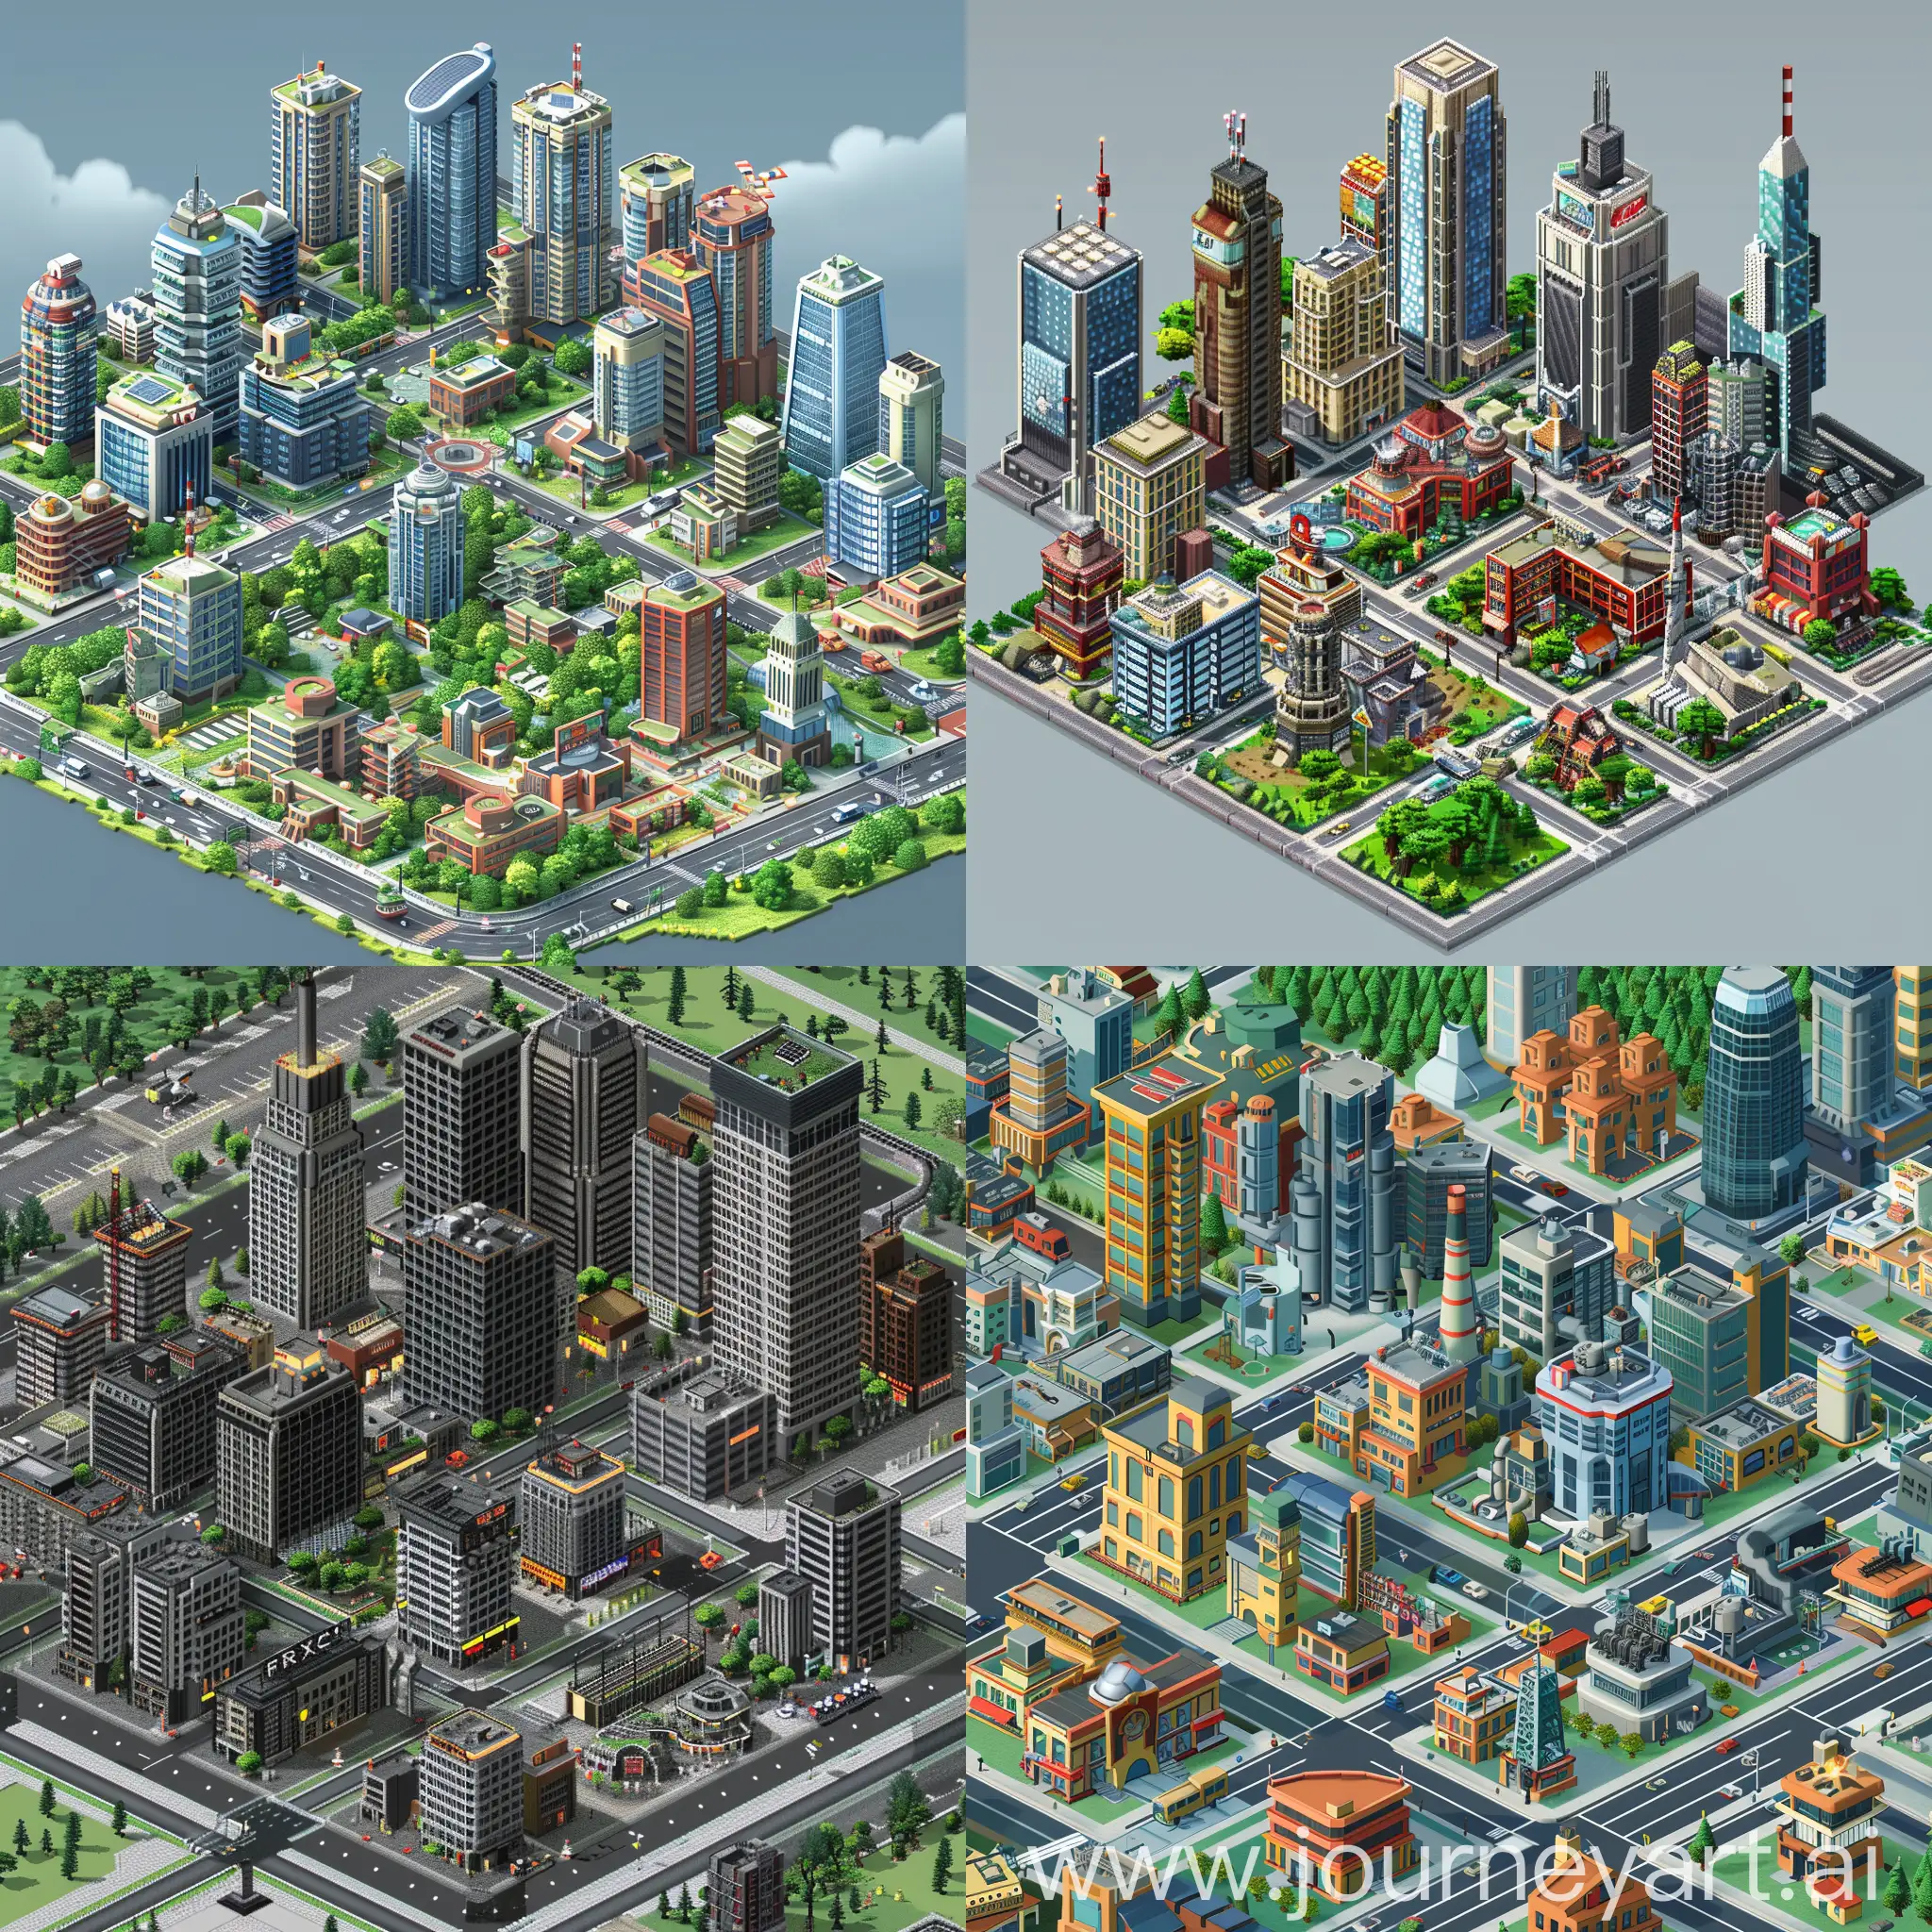 Detailed-Urban-Cityscape-with-Skyscrapers-Military-Facilities-and-Diverse-Districts